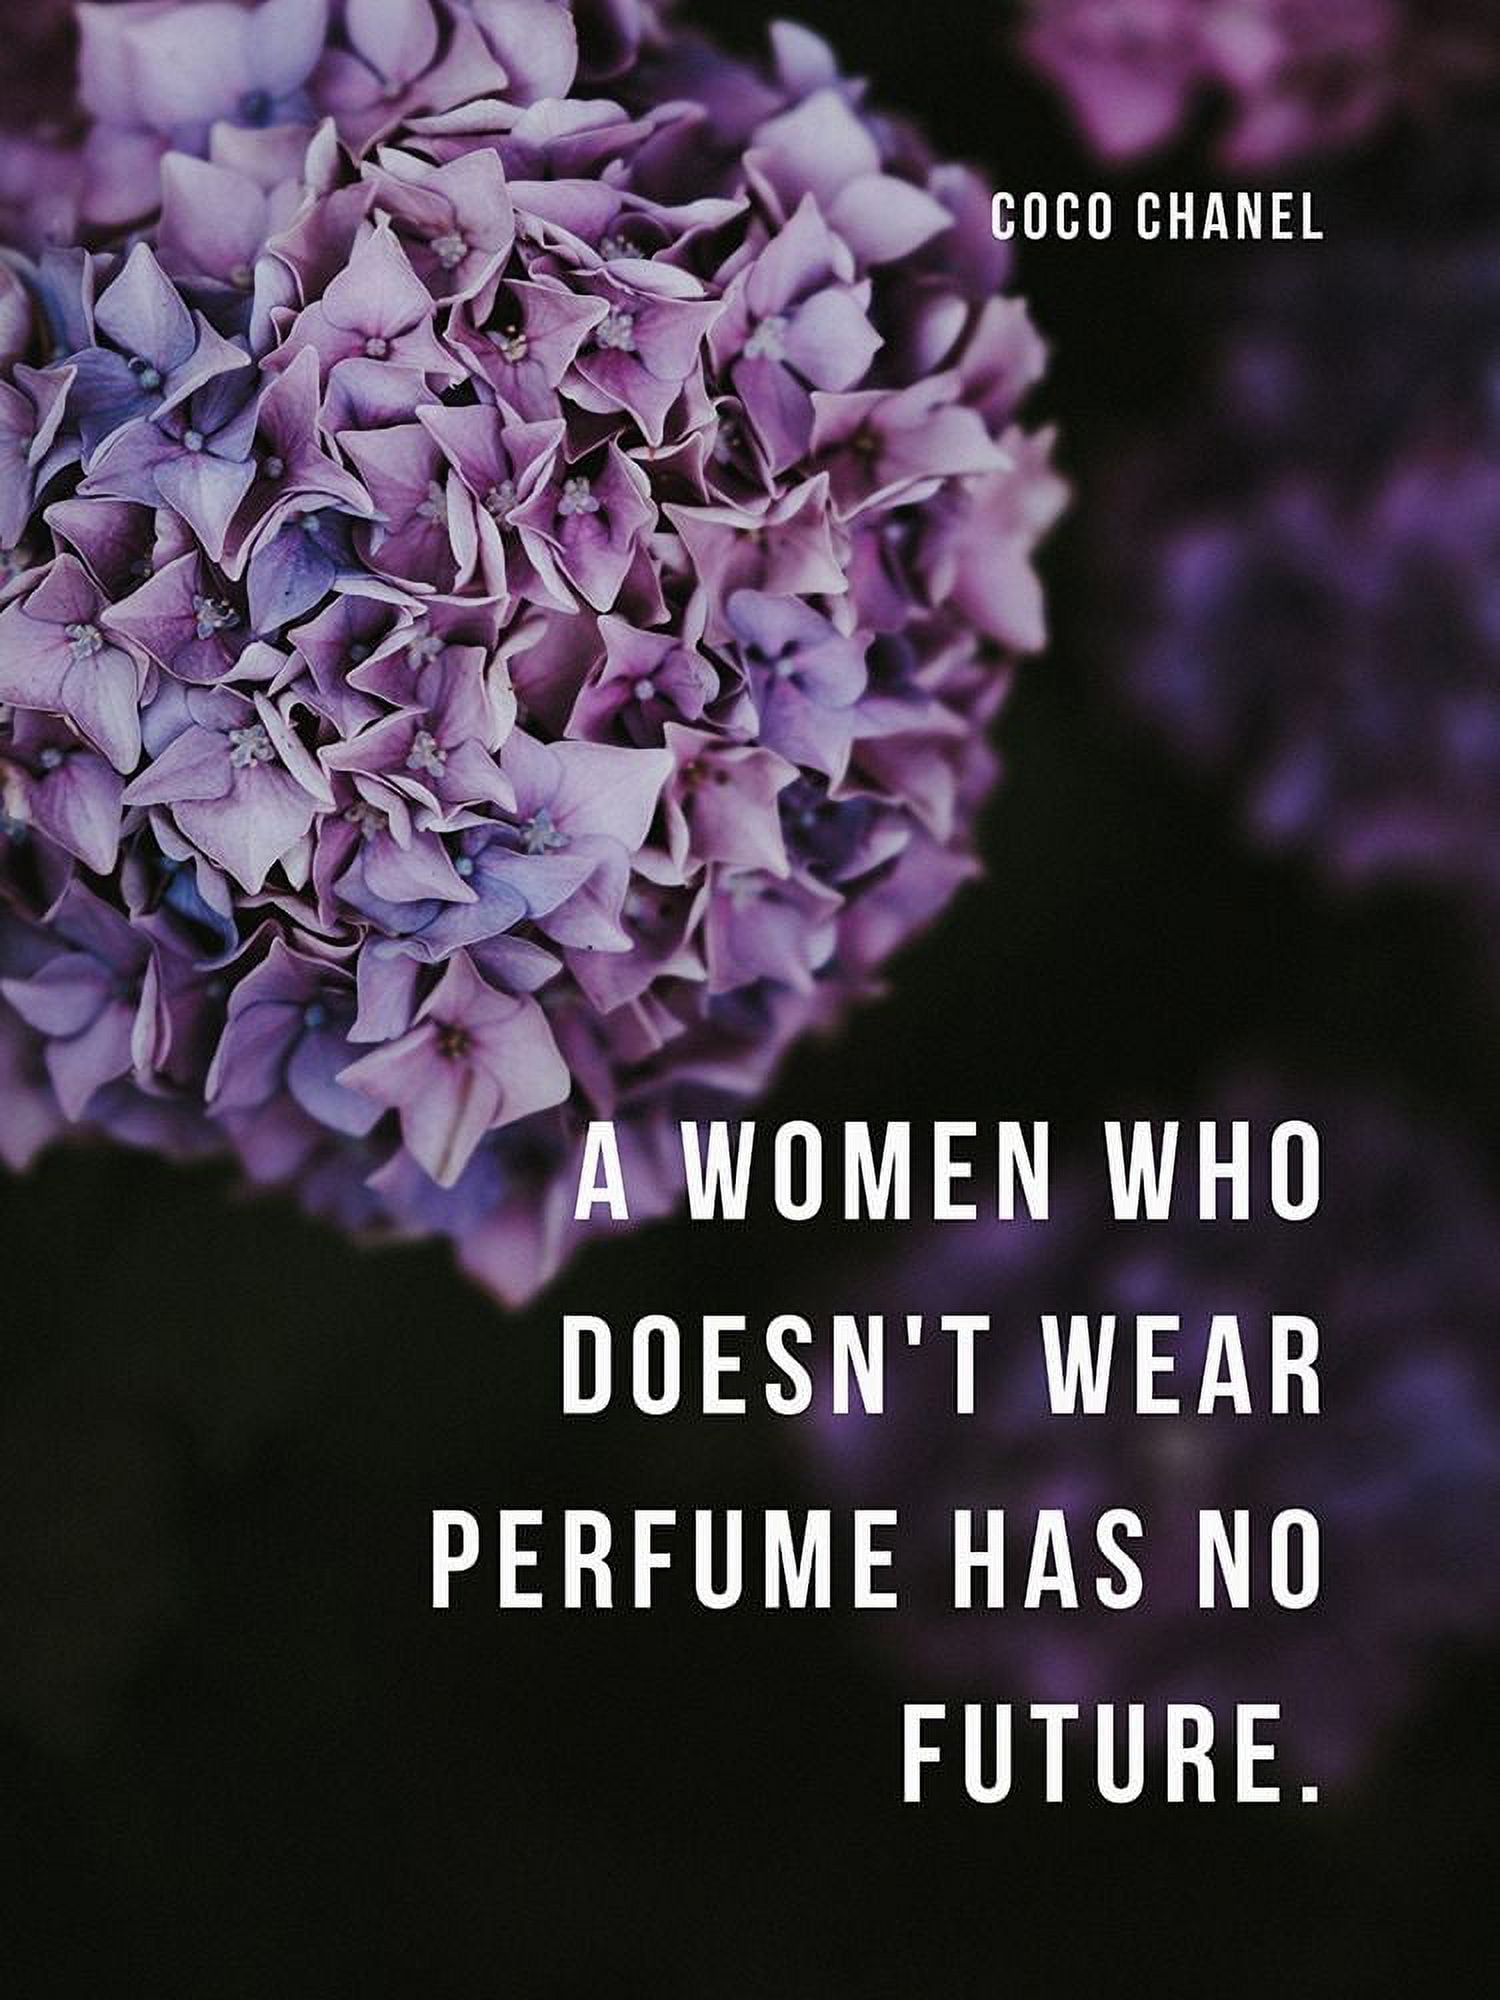 Coco Chanel Quote on Perfume  Coco chanel quotes, Chanel quotes